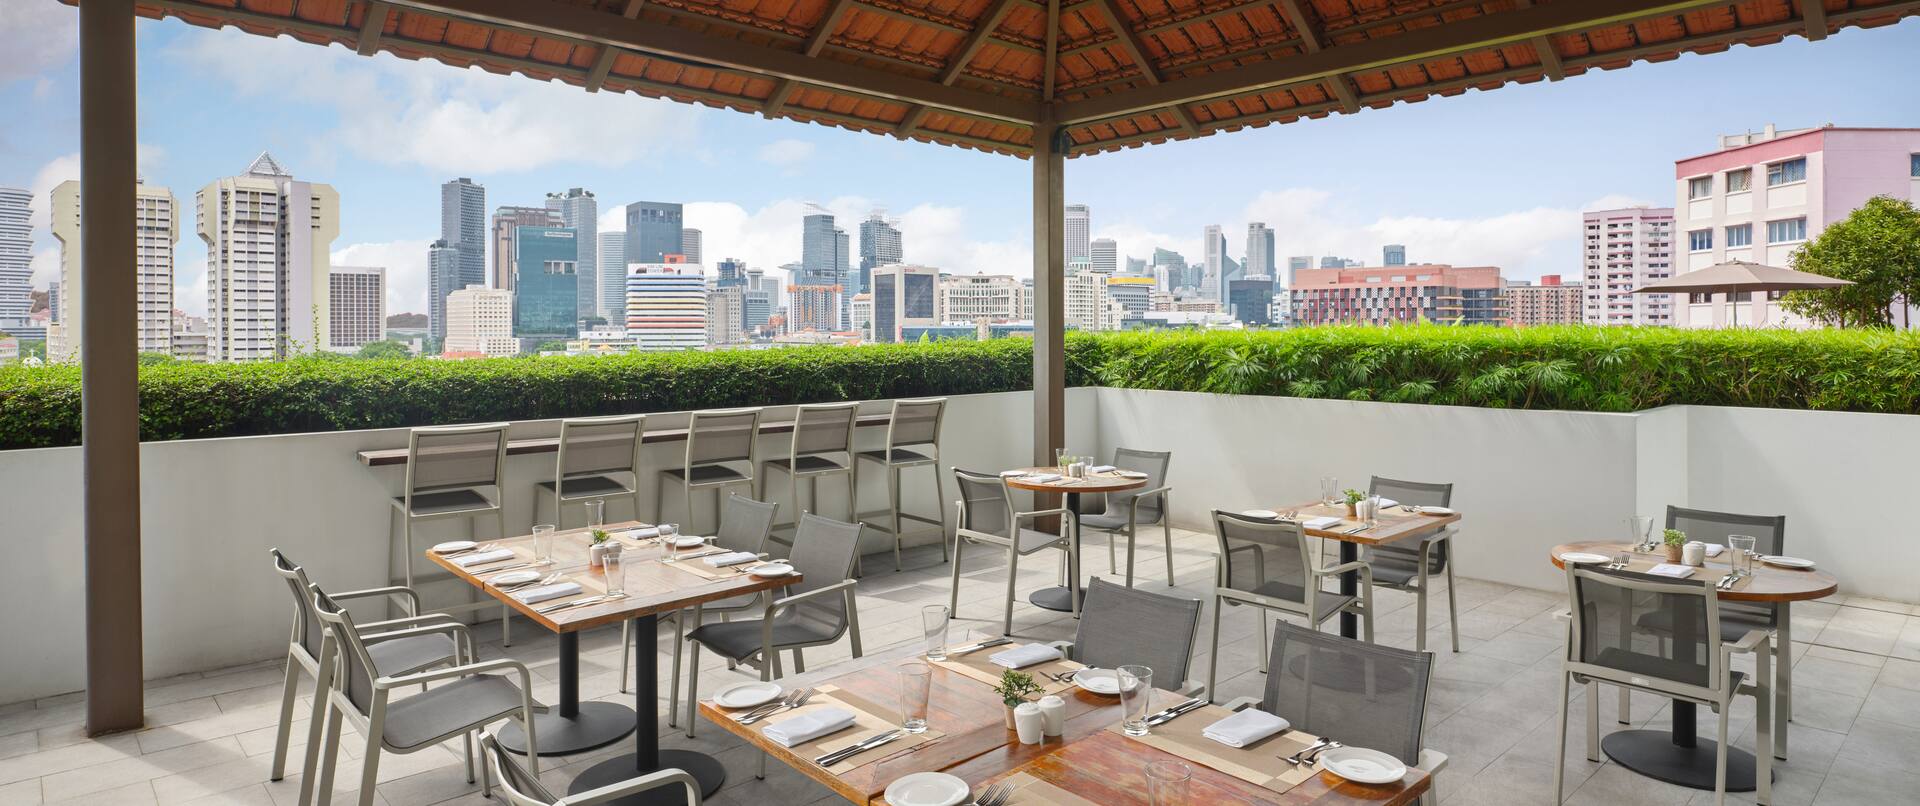 Outdoor Rooftop Dining